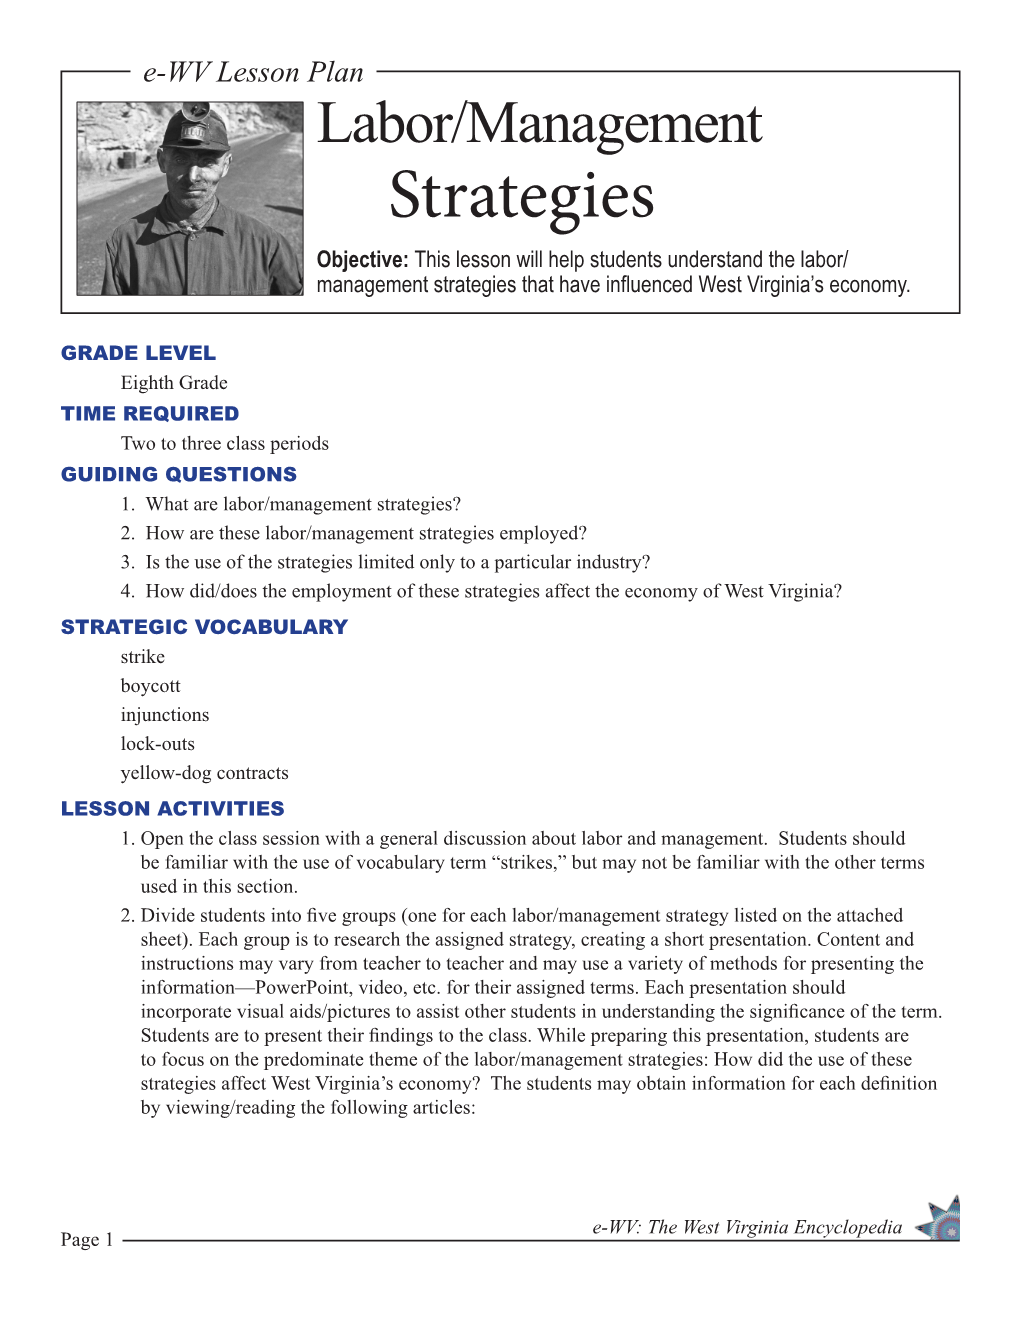 Labor/Management Strategies Objective: This Lesson Will Help Students Understand the Labor/ Management Strategies That Have Influenced West Virginia’S Economy